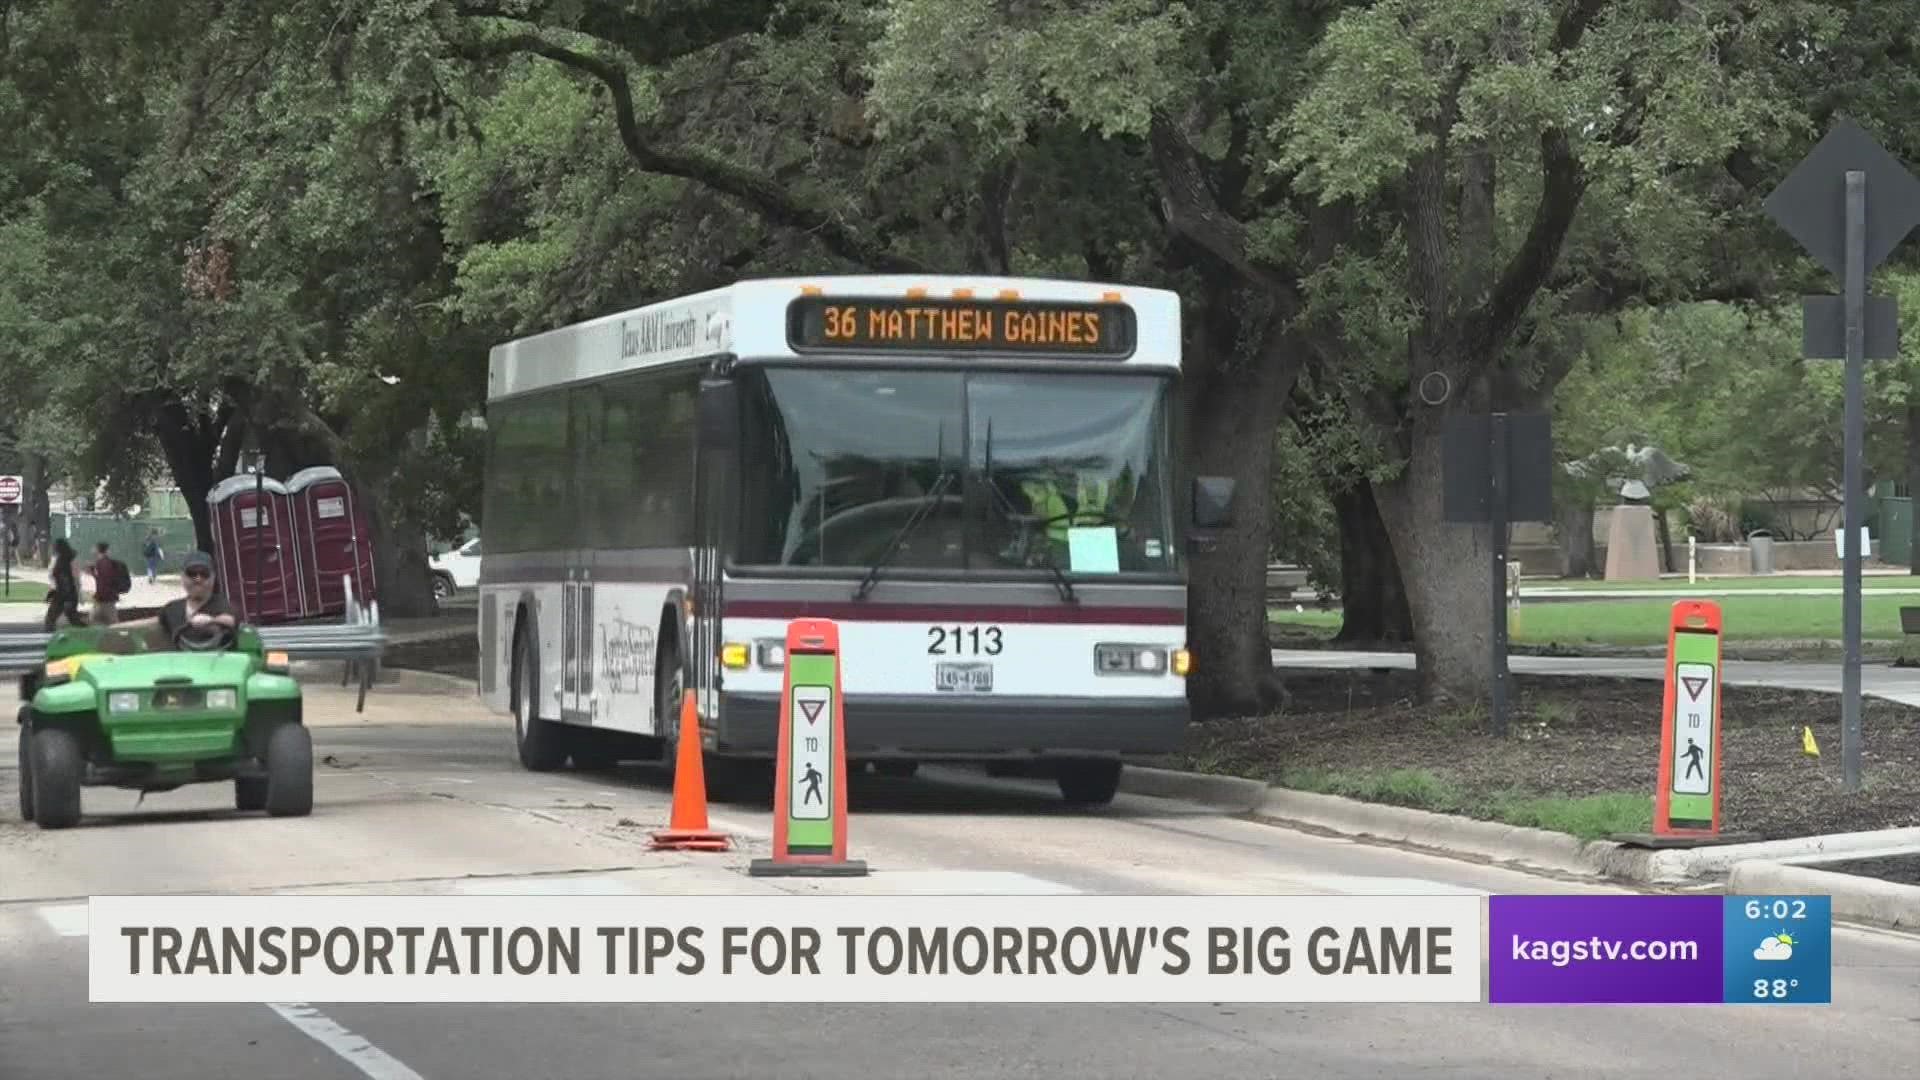 The start of the new college football season is here in Aggieland, and KAGS TV has compiled tips to help you get to Kyle Field in time for kickoff.